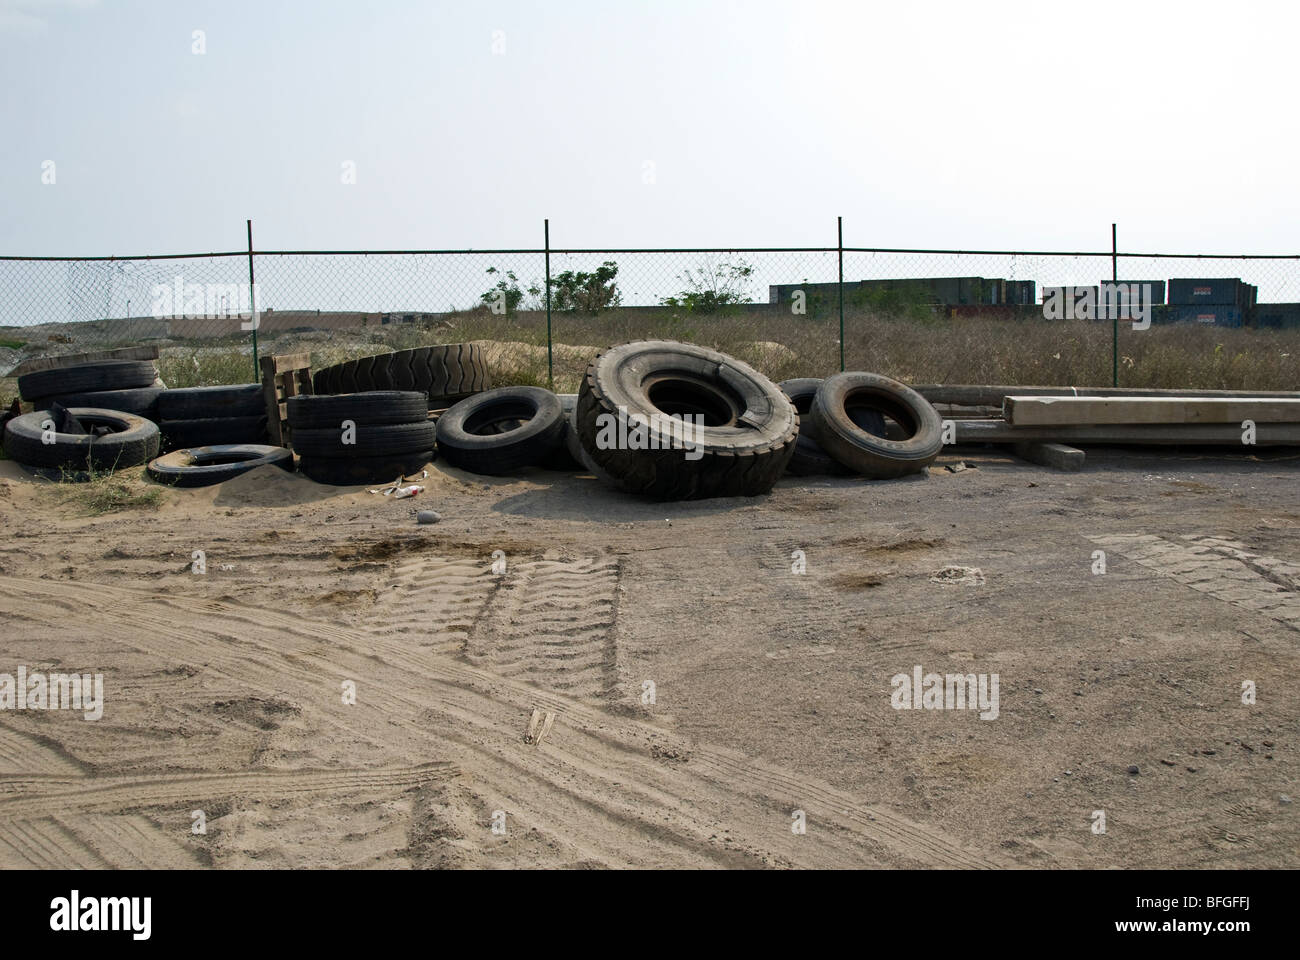 a stack of old tires Stock Photo